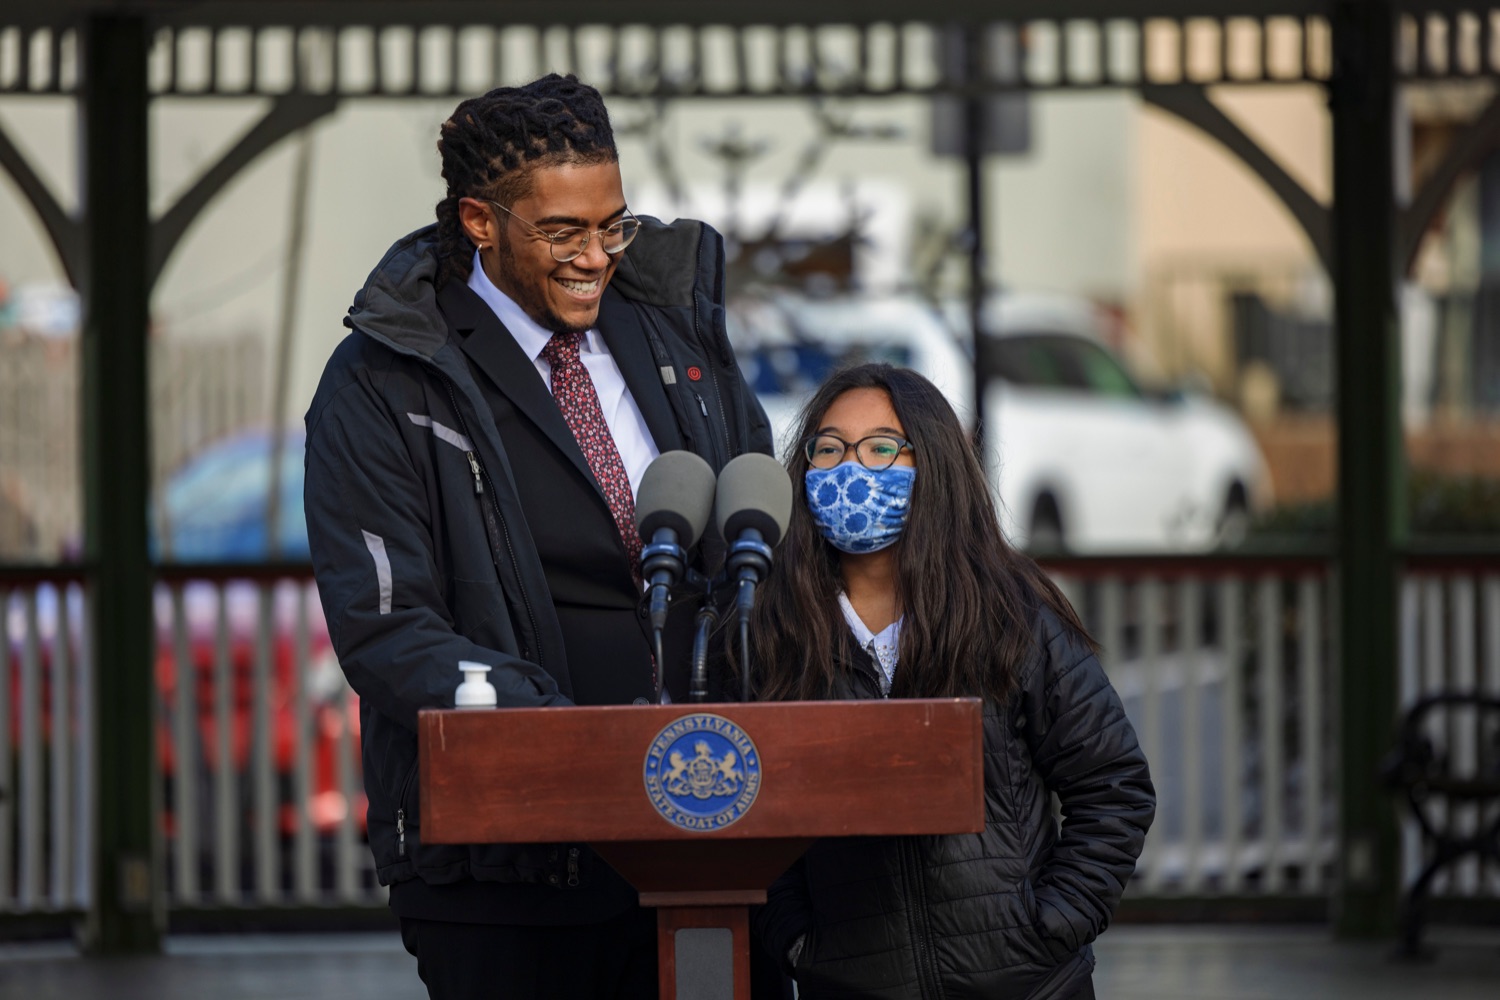 Victor Cabral, Office of Advocacy and Reform deputy director, with his 9-year-old daughter, Bella, during an event observing the "Day of Racial Healing" in Pennsylvania at Jenkintown Town Square on Tuesday, January 18, 2022. By proclamation of Governor Tom Wolf, Pennsylvania joined communities across the United States in mobilizing events and activities that support bringing racial healing into homes, communities, and institutions. This is a call to action to work together and heal the wounds of racial bias and commit to building an equitable and just society so that all residents can thrive.<br><a href="https://filesource.amperwave.net/commonwealthofpa/photo/20315_OAR_RacialHealing_NK_023.JPG" target="_blank">⇣ Download Photo</a>